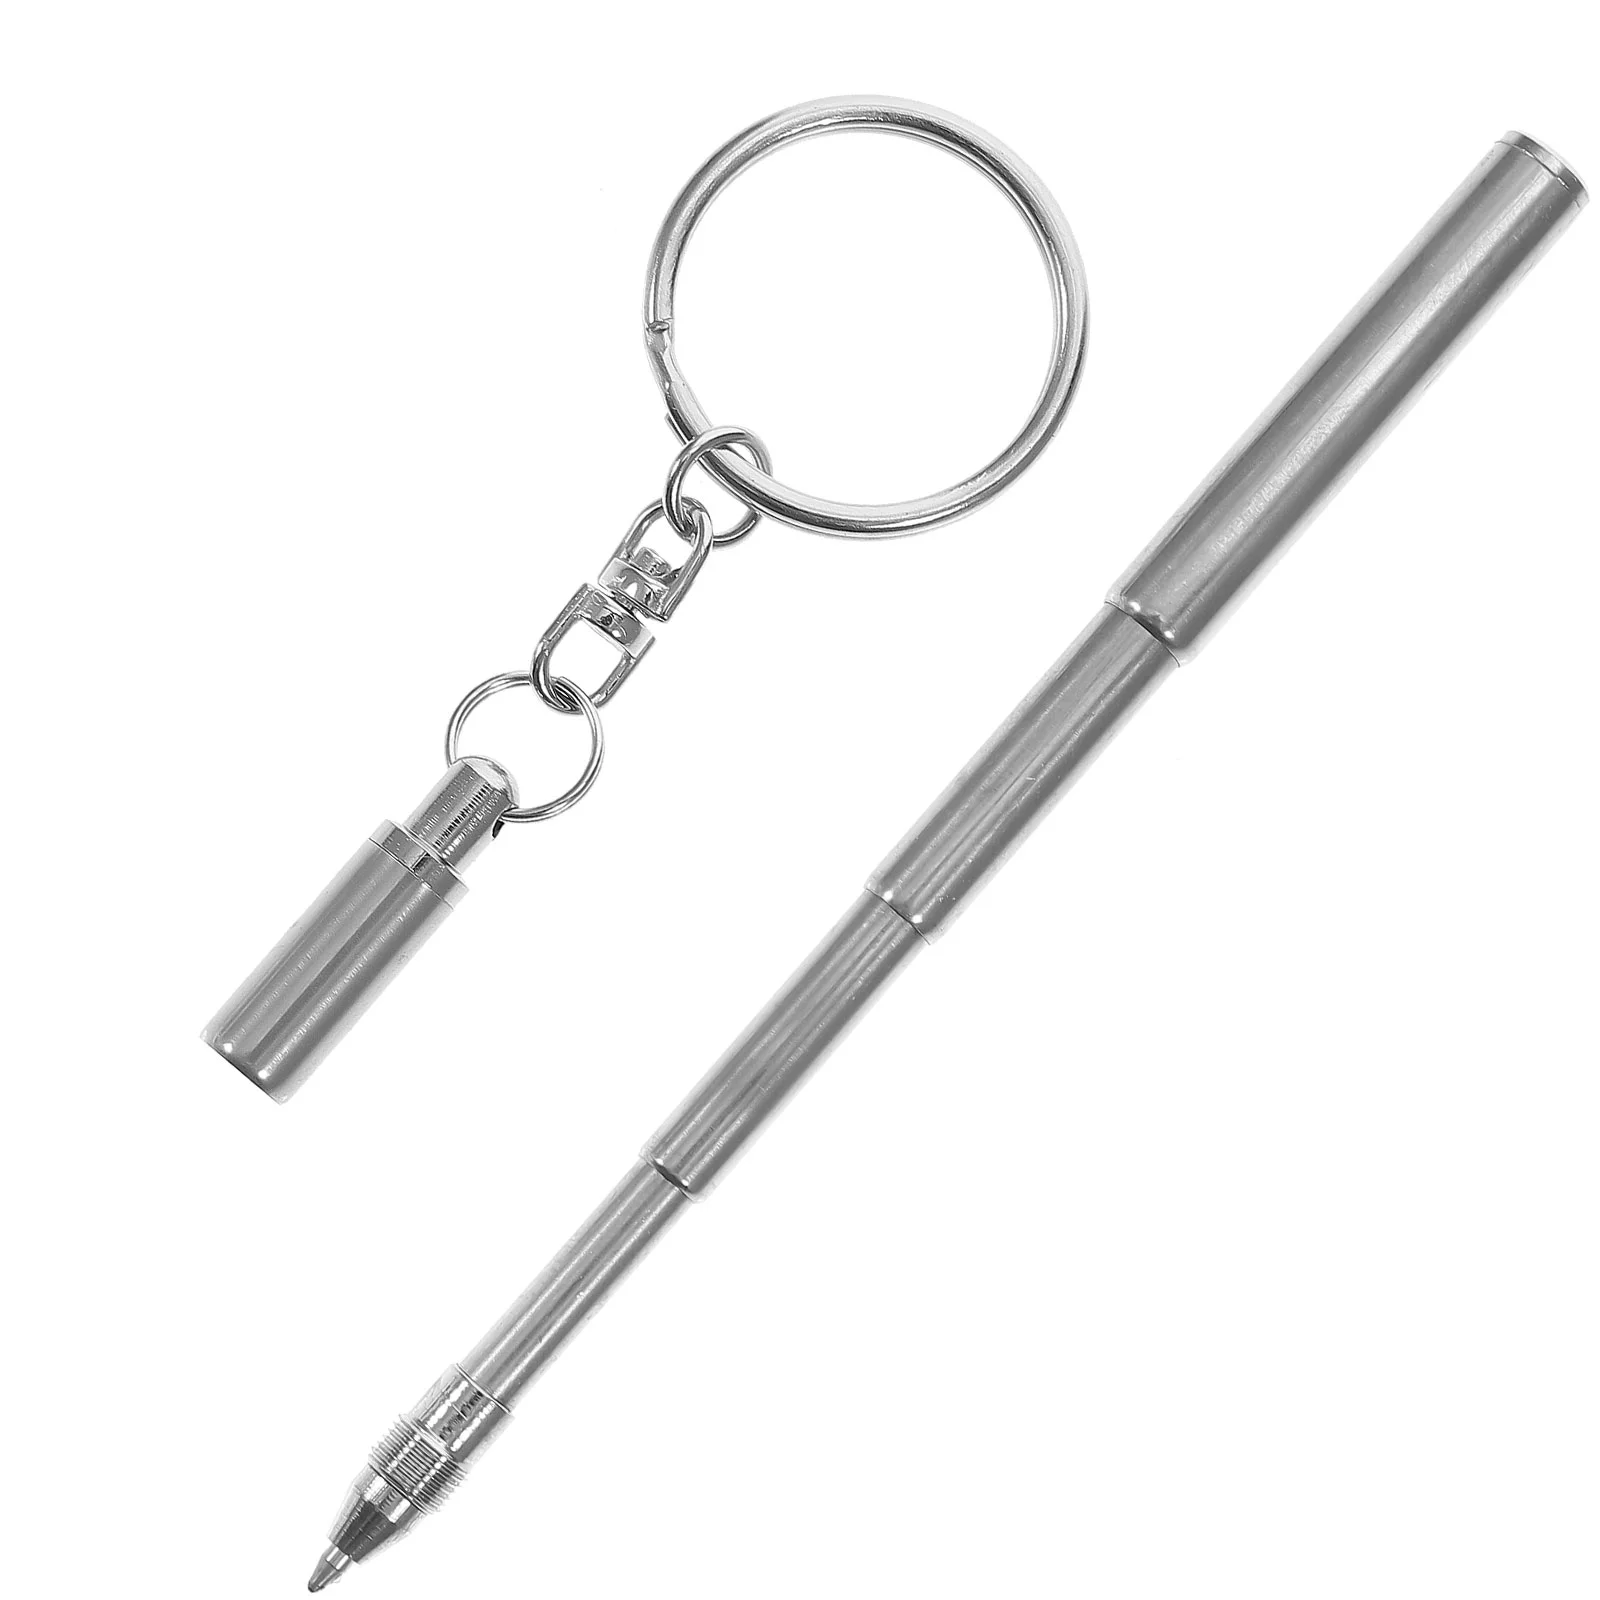 Retractable Pen Shape Keychain Mini Metal Key Ring Portable Stainless Steel Telescopic Ballpoint Pen Keychain Tools mini blue tooth bt 5 3 phone selfie shutter remote control ring wireless smart remote controller page turner for ios android